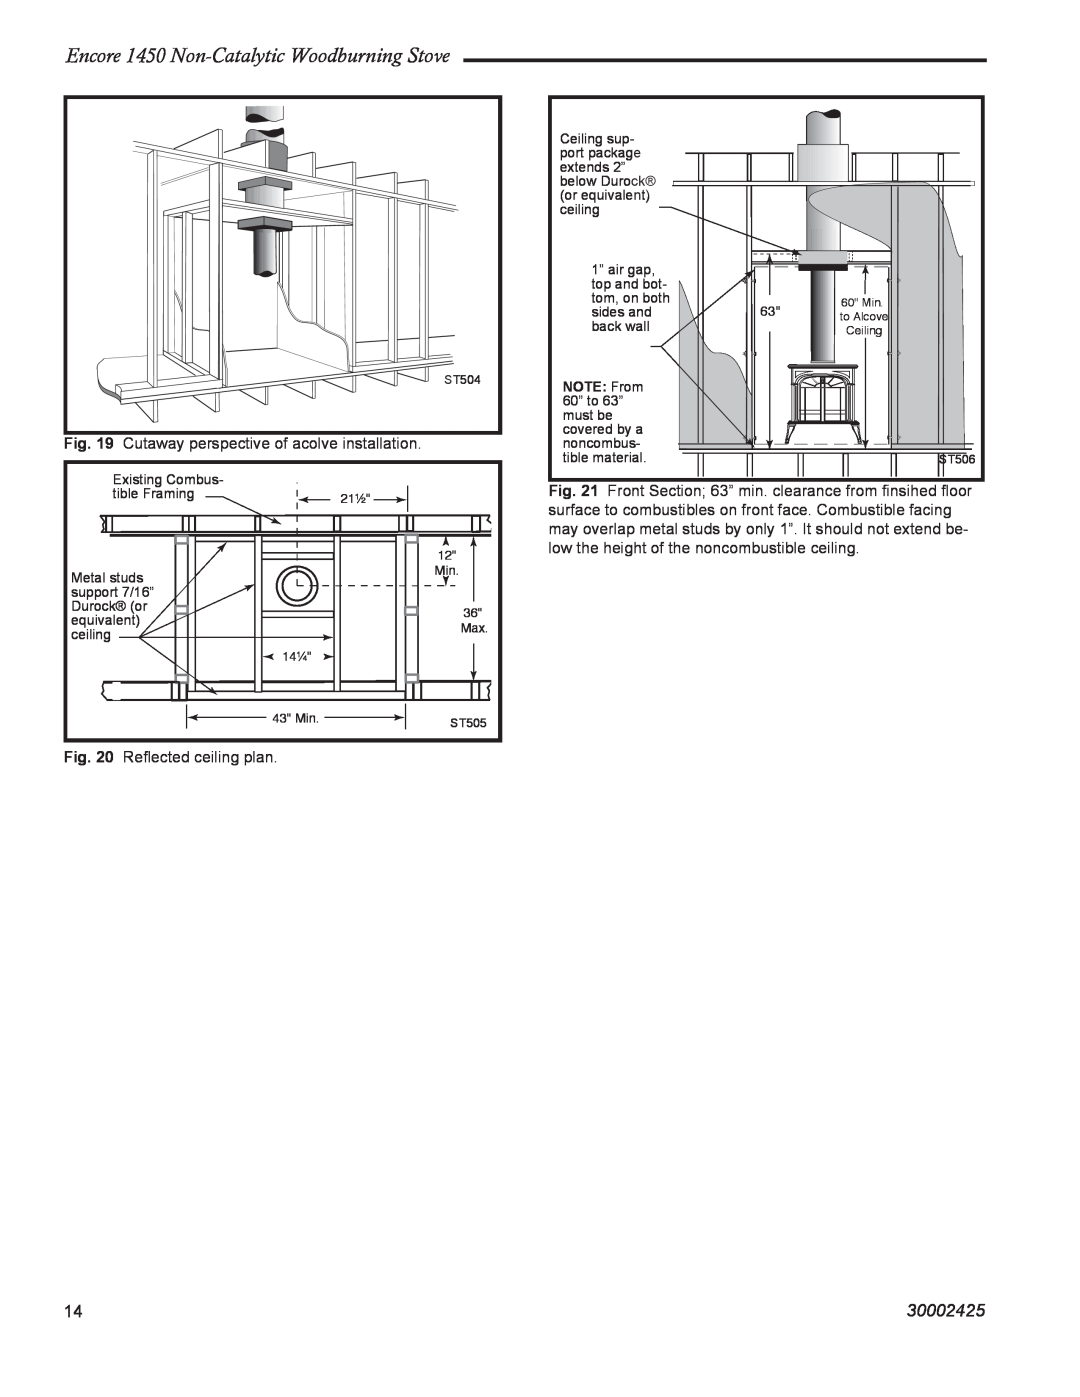 Vermont Casting Encore 1450 Non-CatalyticWoodburning Stove, 30002425, Cutaway perspective of acolve installation 